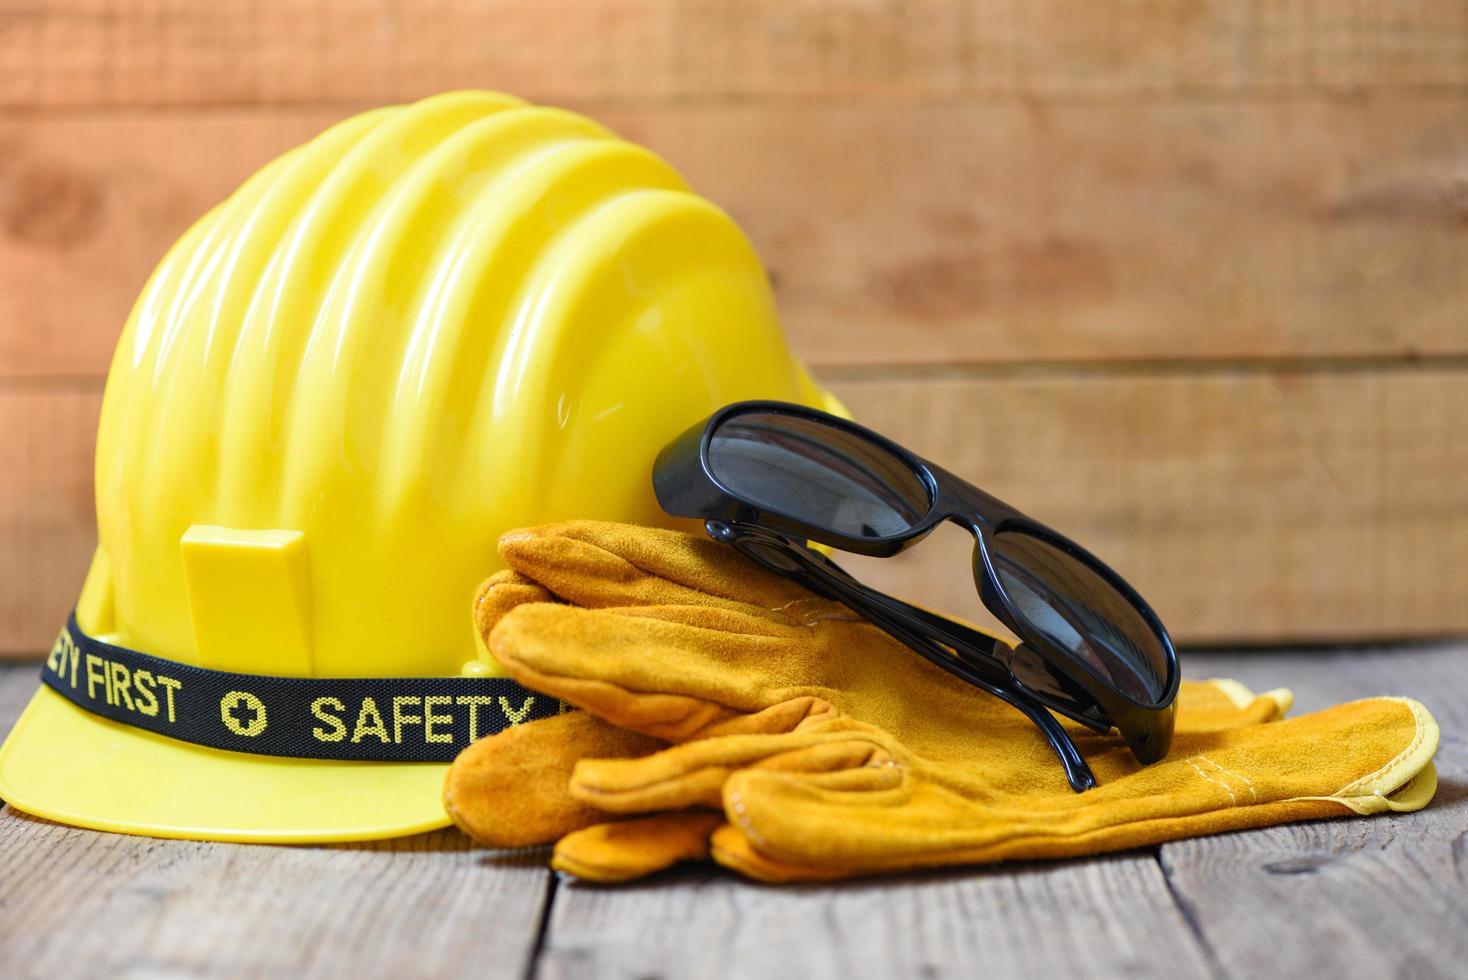 Safety First: Protect Yourself with the Right Gear!